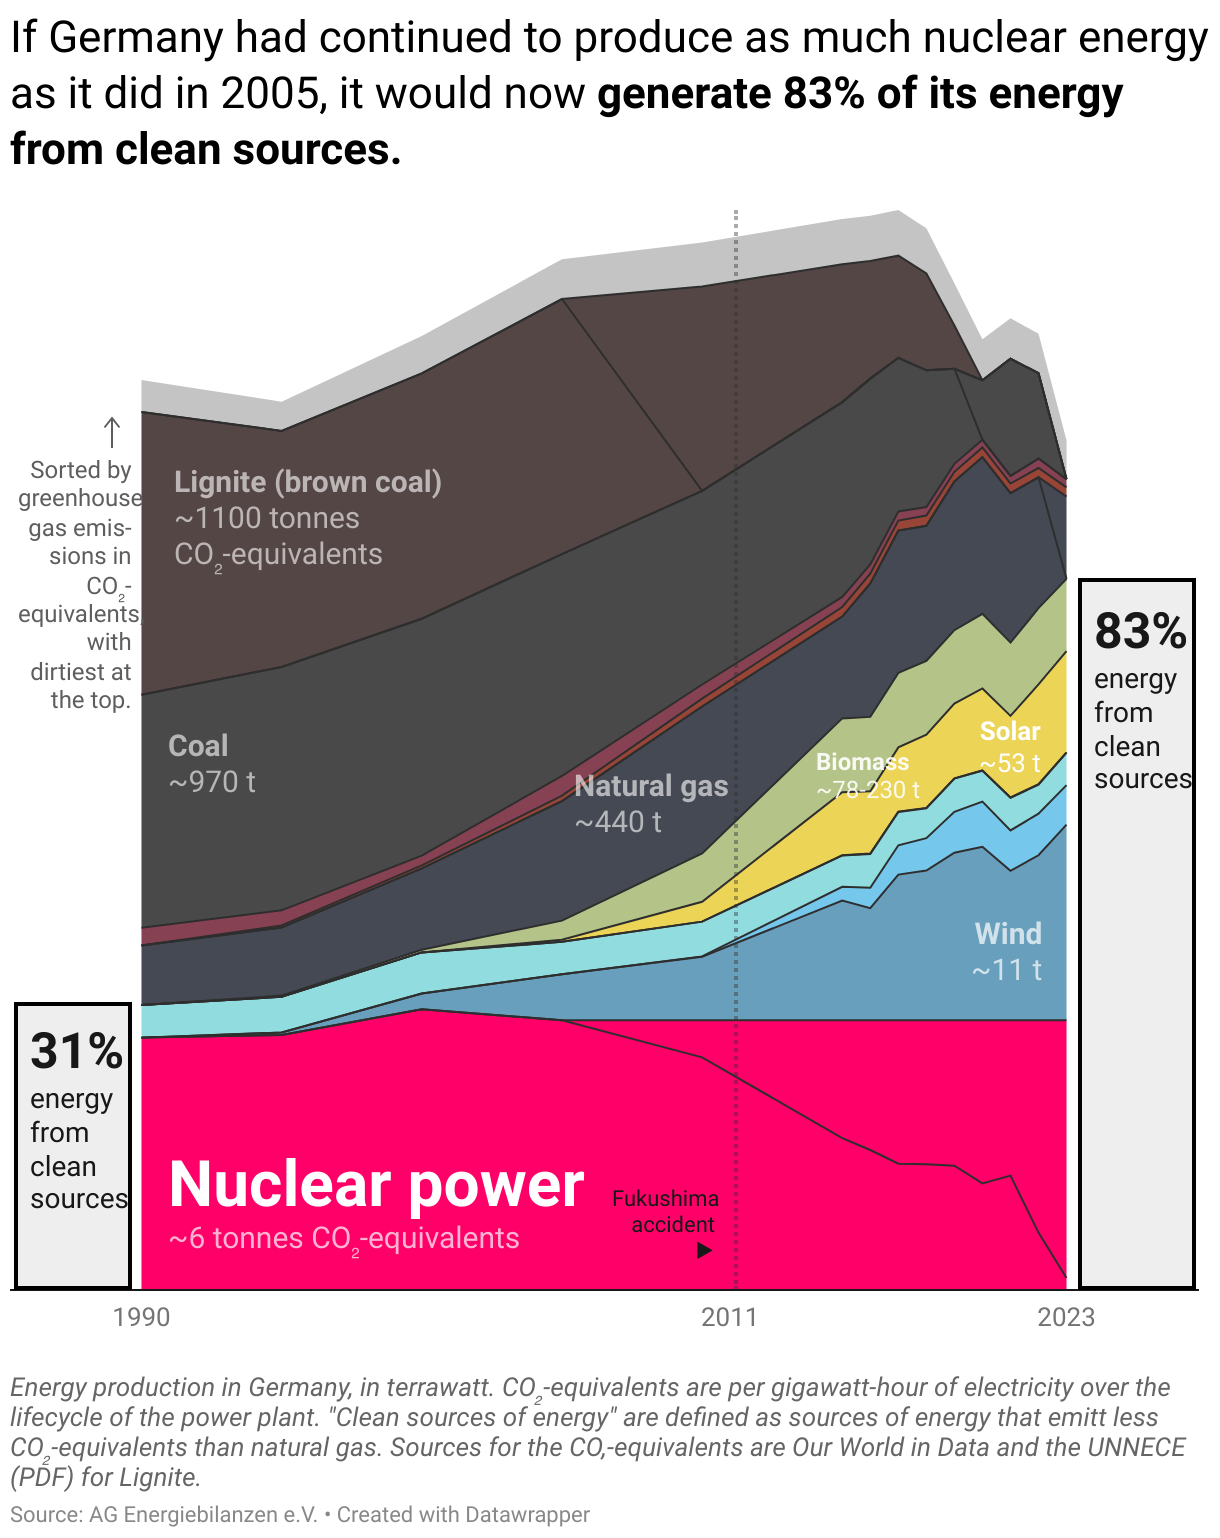 If Germany had continued to produce as much nuclear energy as it did in 2005, it would now generate 83% of its energy from clean sources.